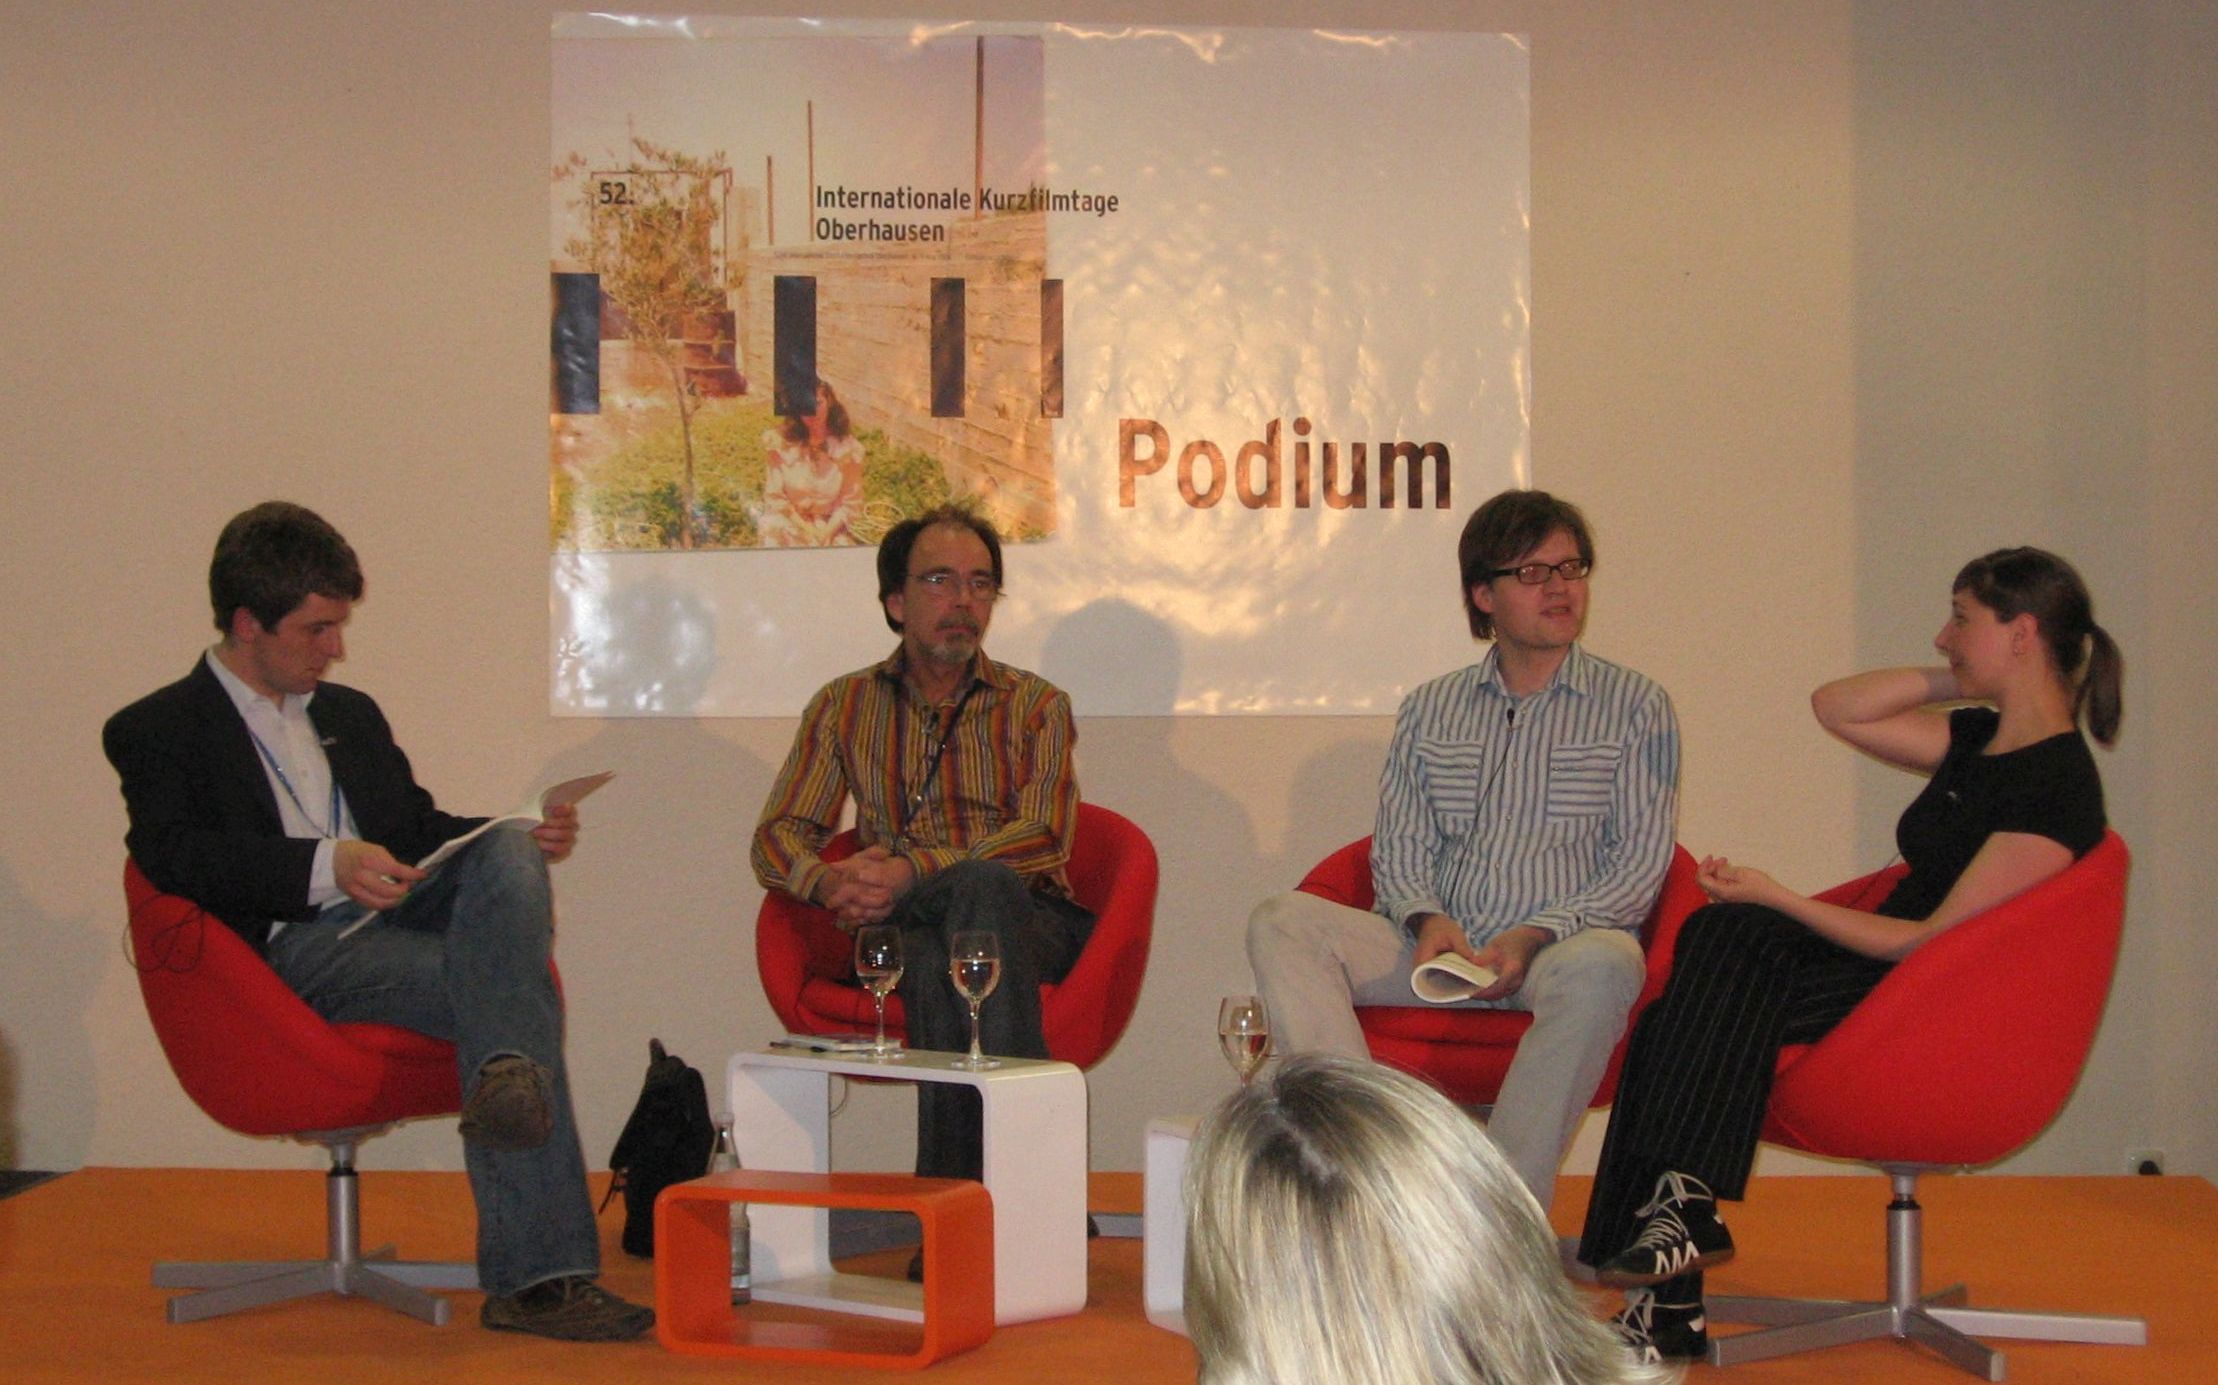 Presentation of the study at the Short Film Festival Oberhausen 2006: four people sitting on a podium.